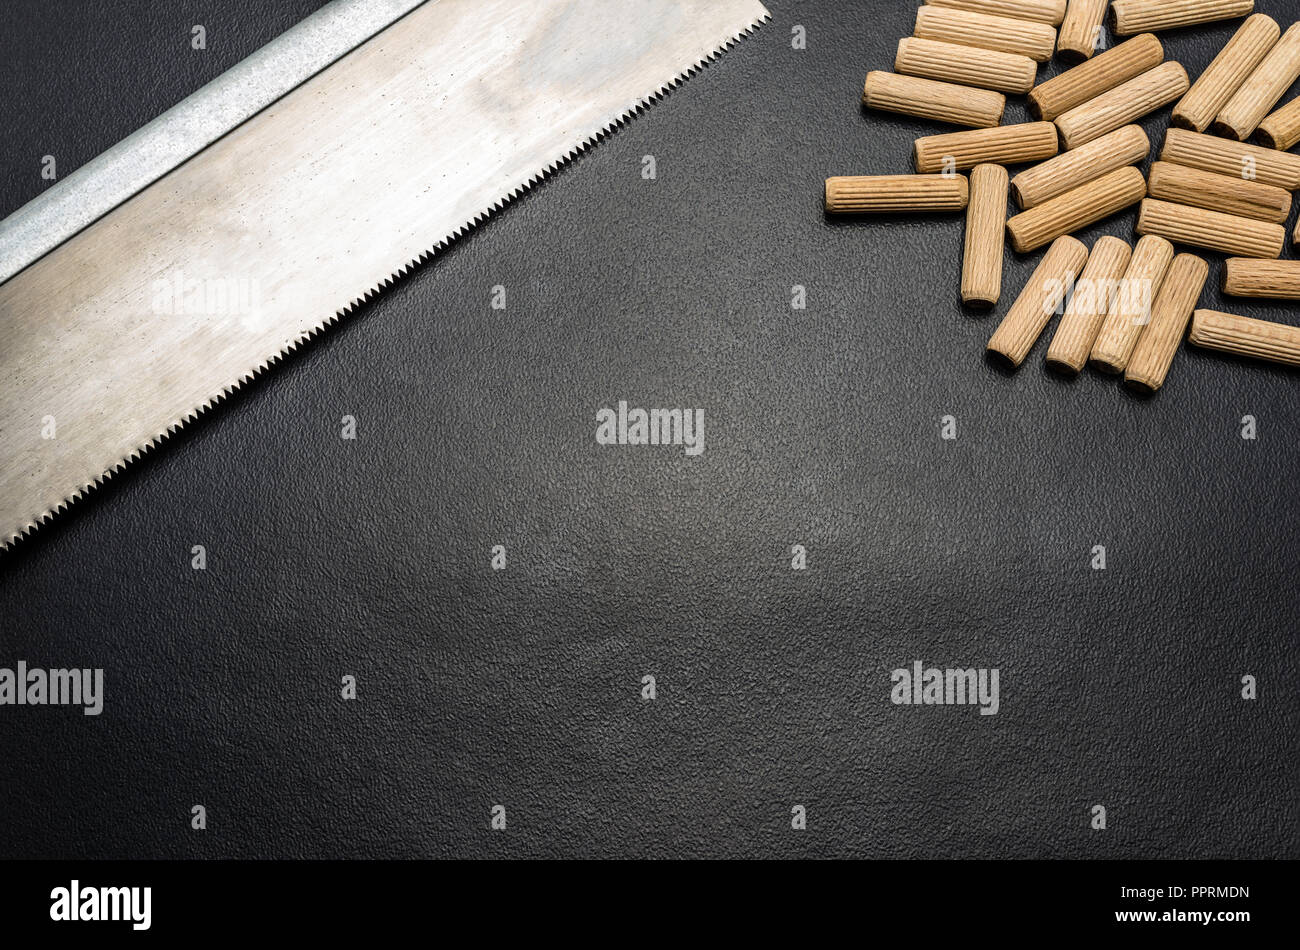 A lot of wooden pegs and hand saw for wood lying flat on a black background. Stock Photo